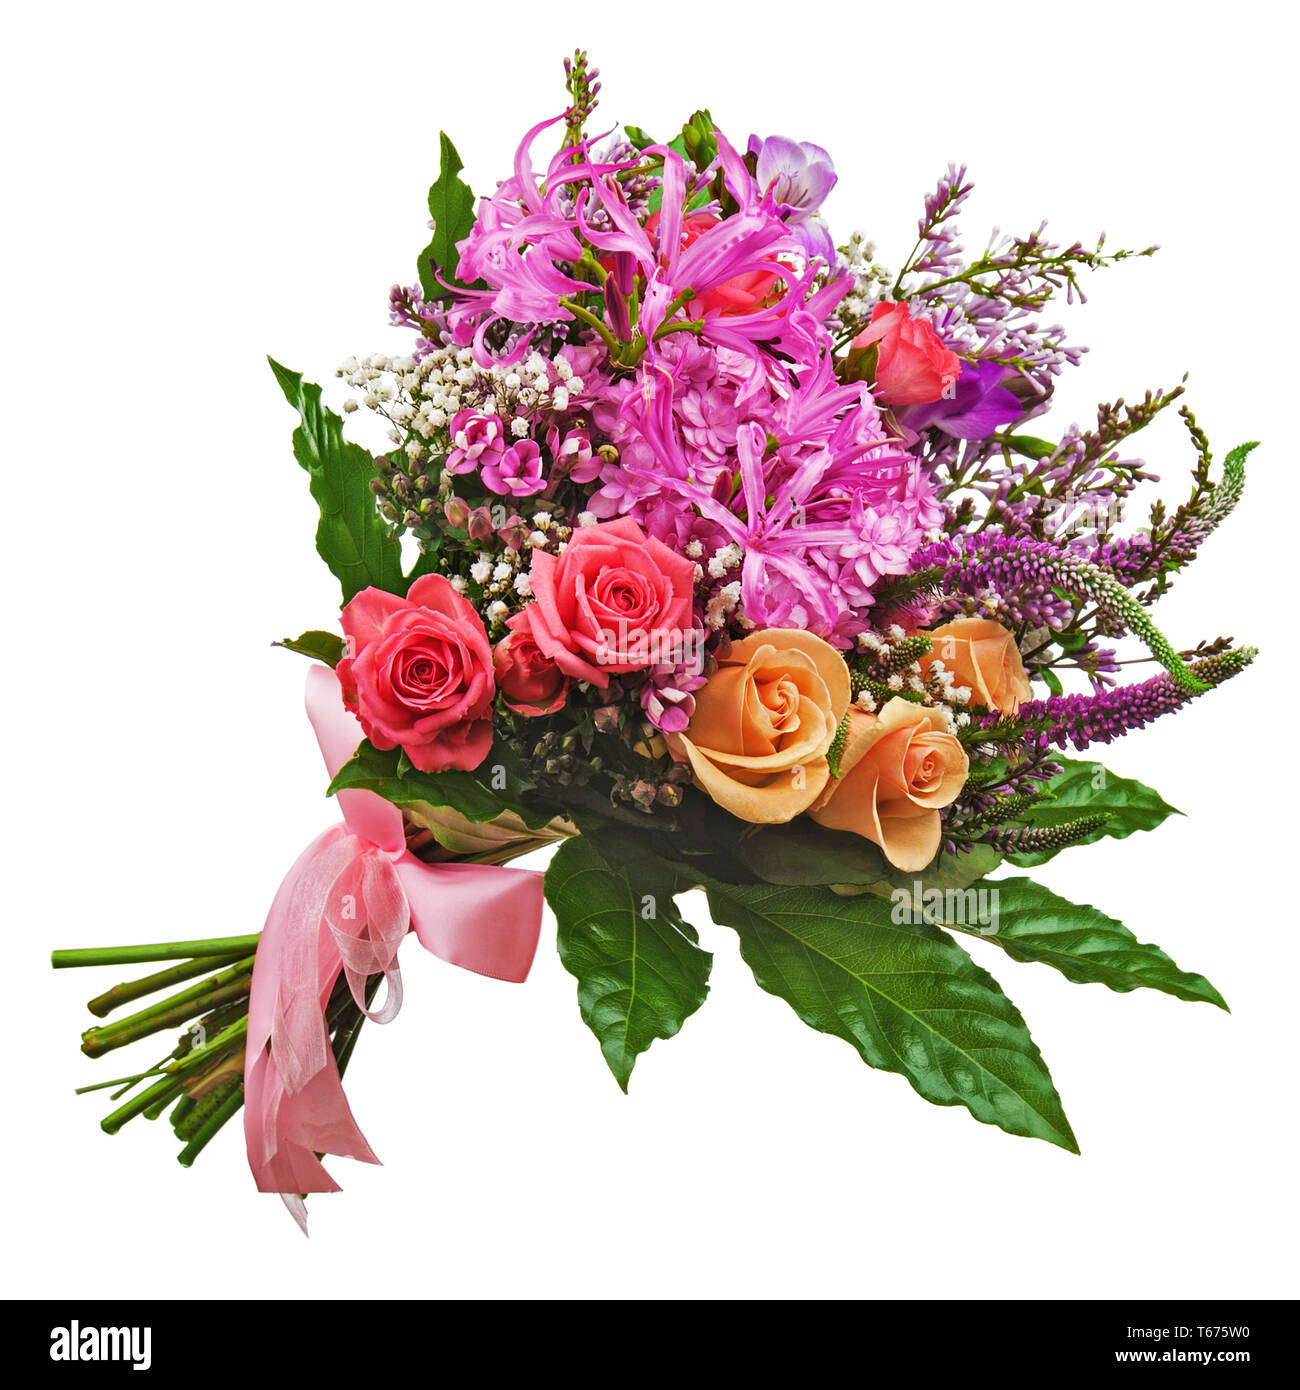 Floral bouquet of roses, lilies and orchids isolat Stock Photo